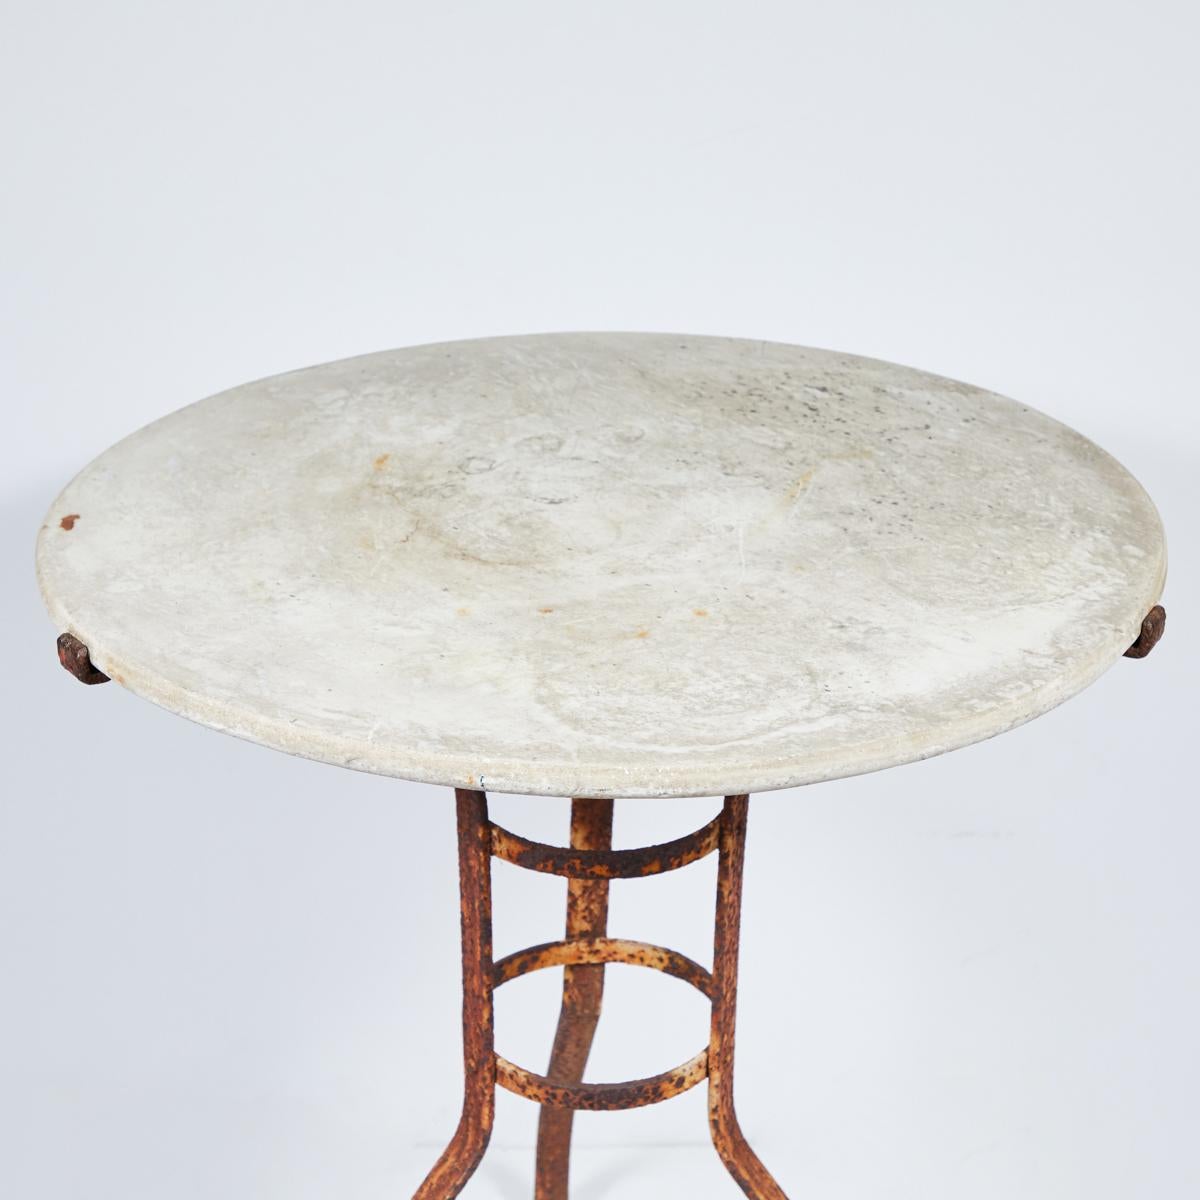 Round marble-top and iron garden table from late 19th century France.